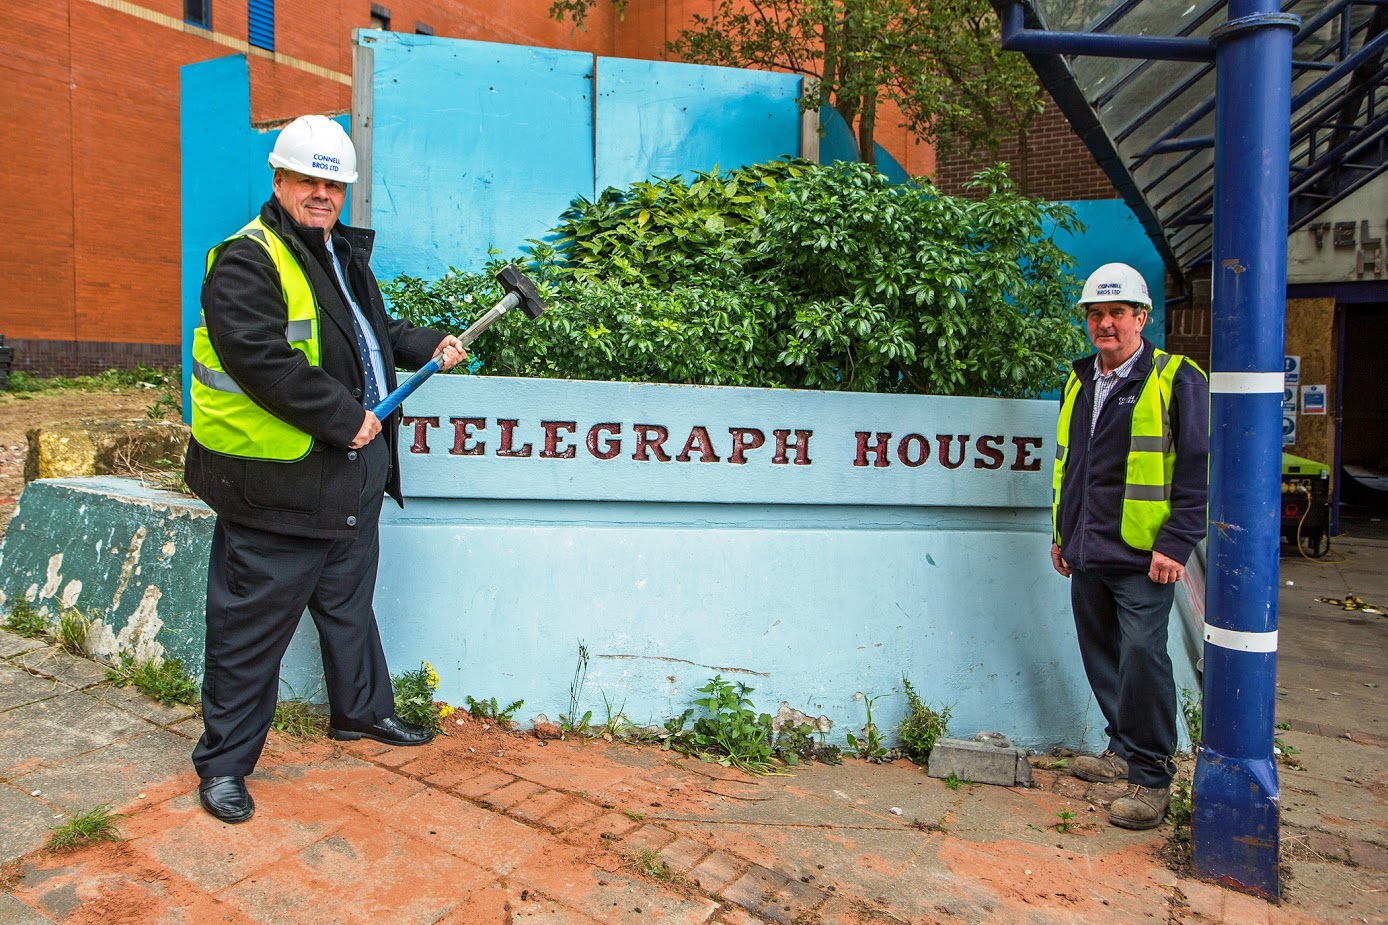 Image: Last post for Telegraph House